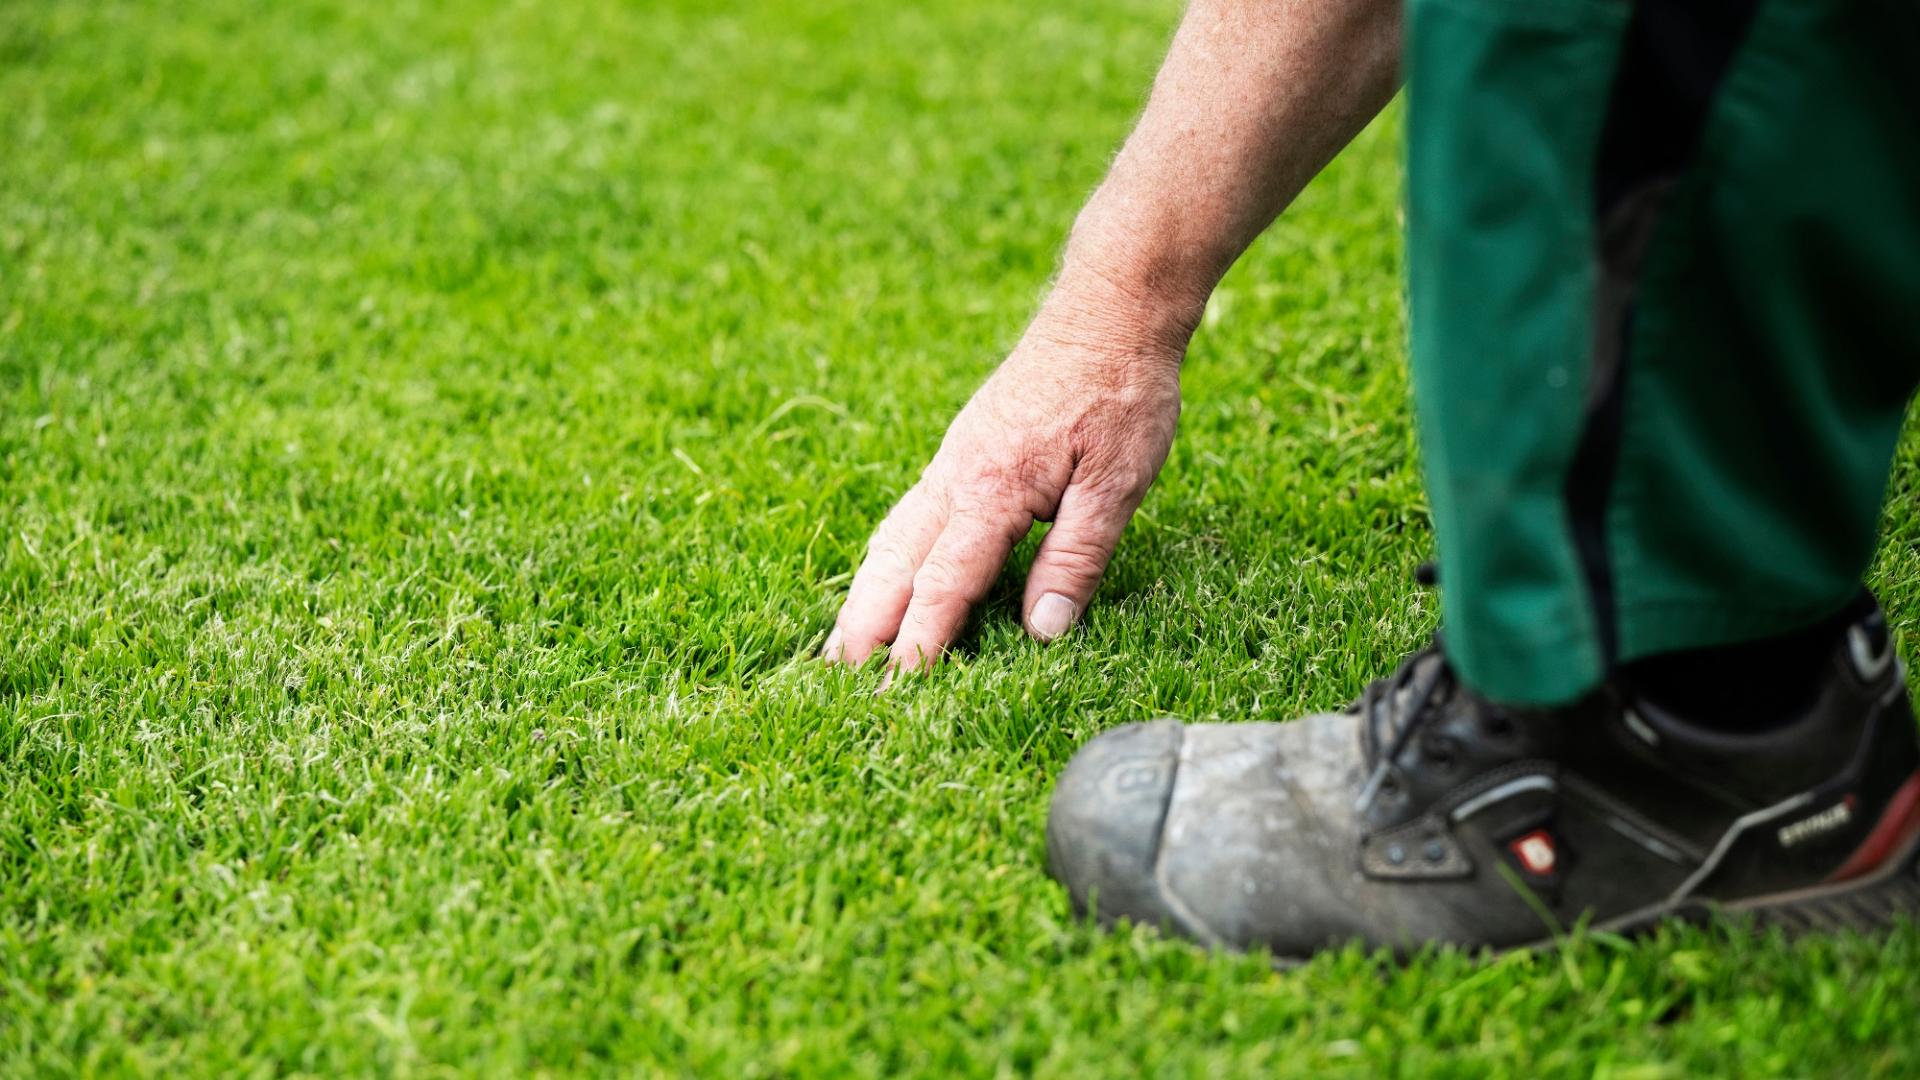 Did you know that the secret to a successful turf is you?